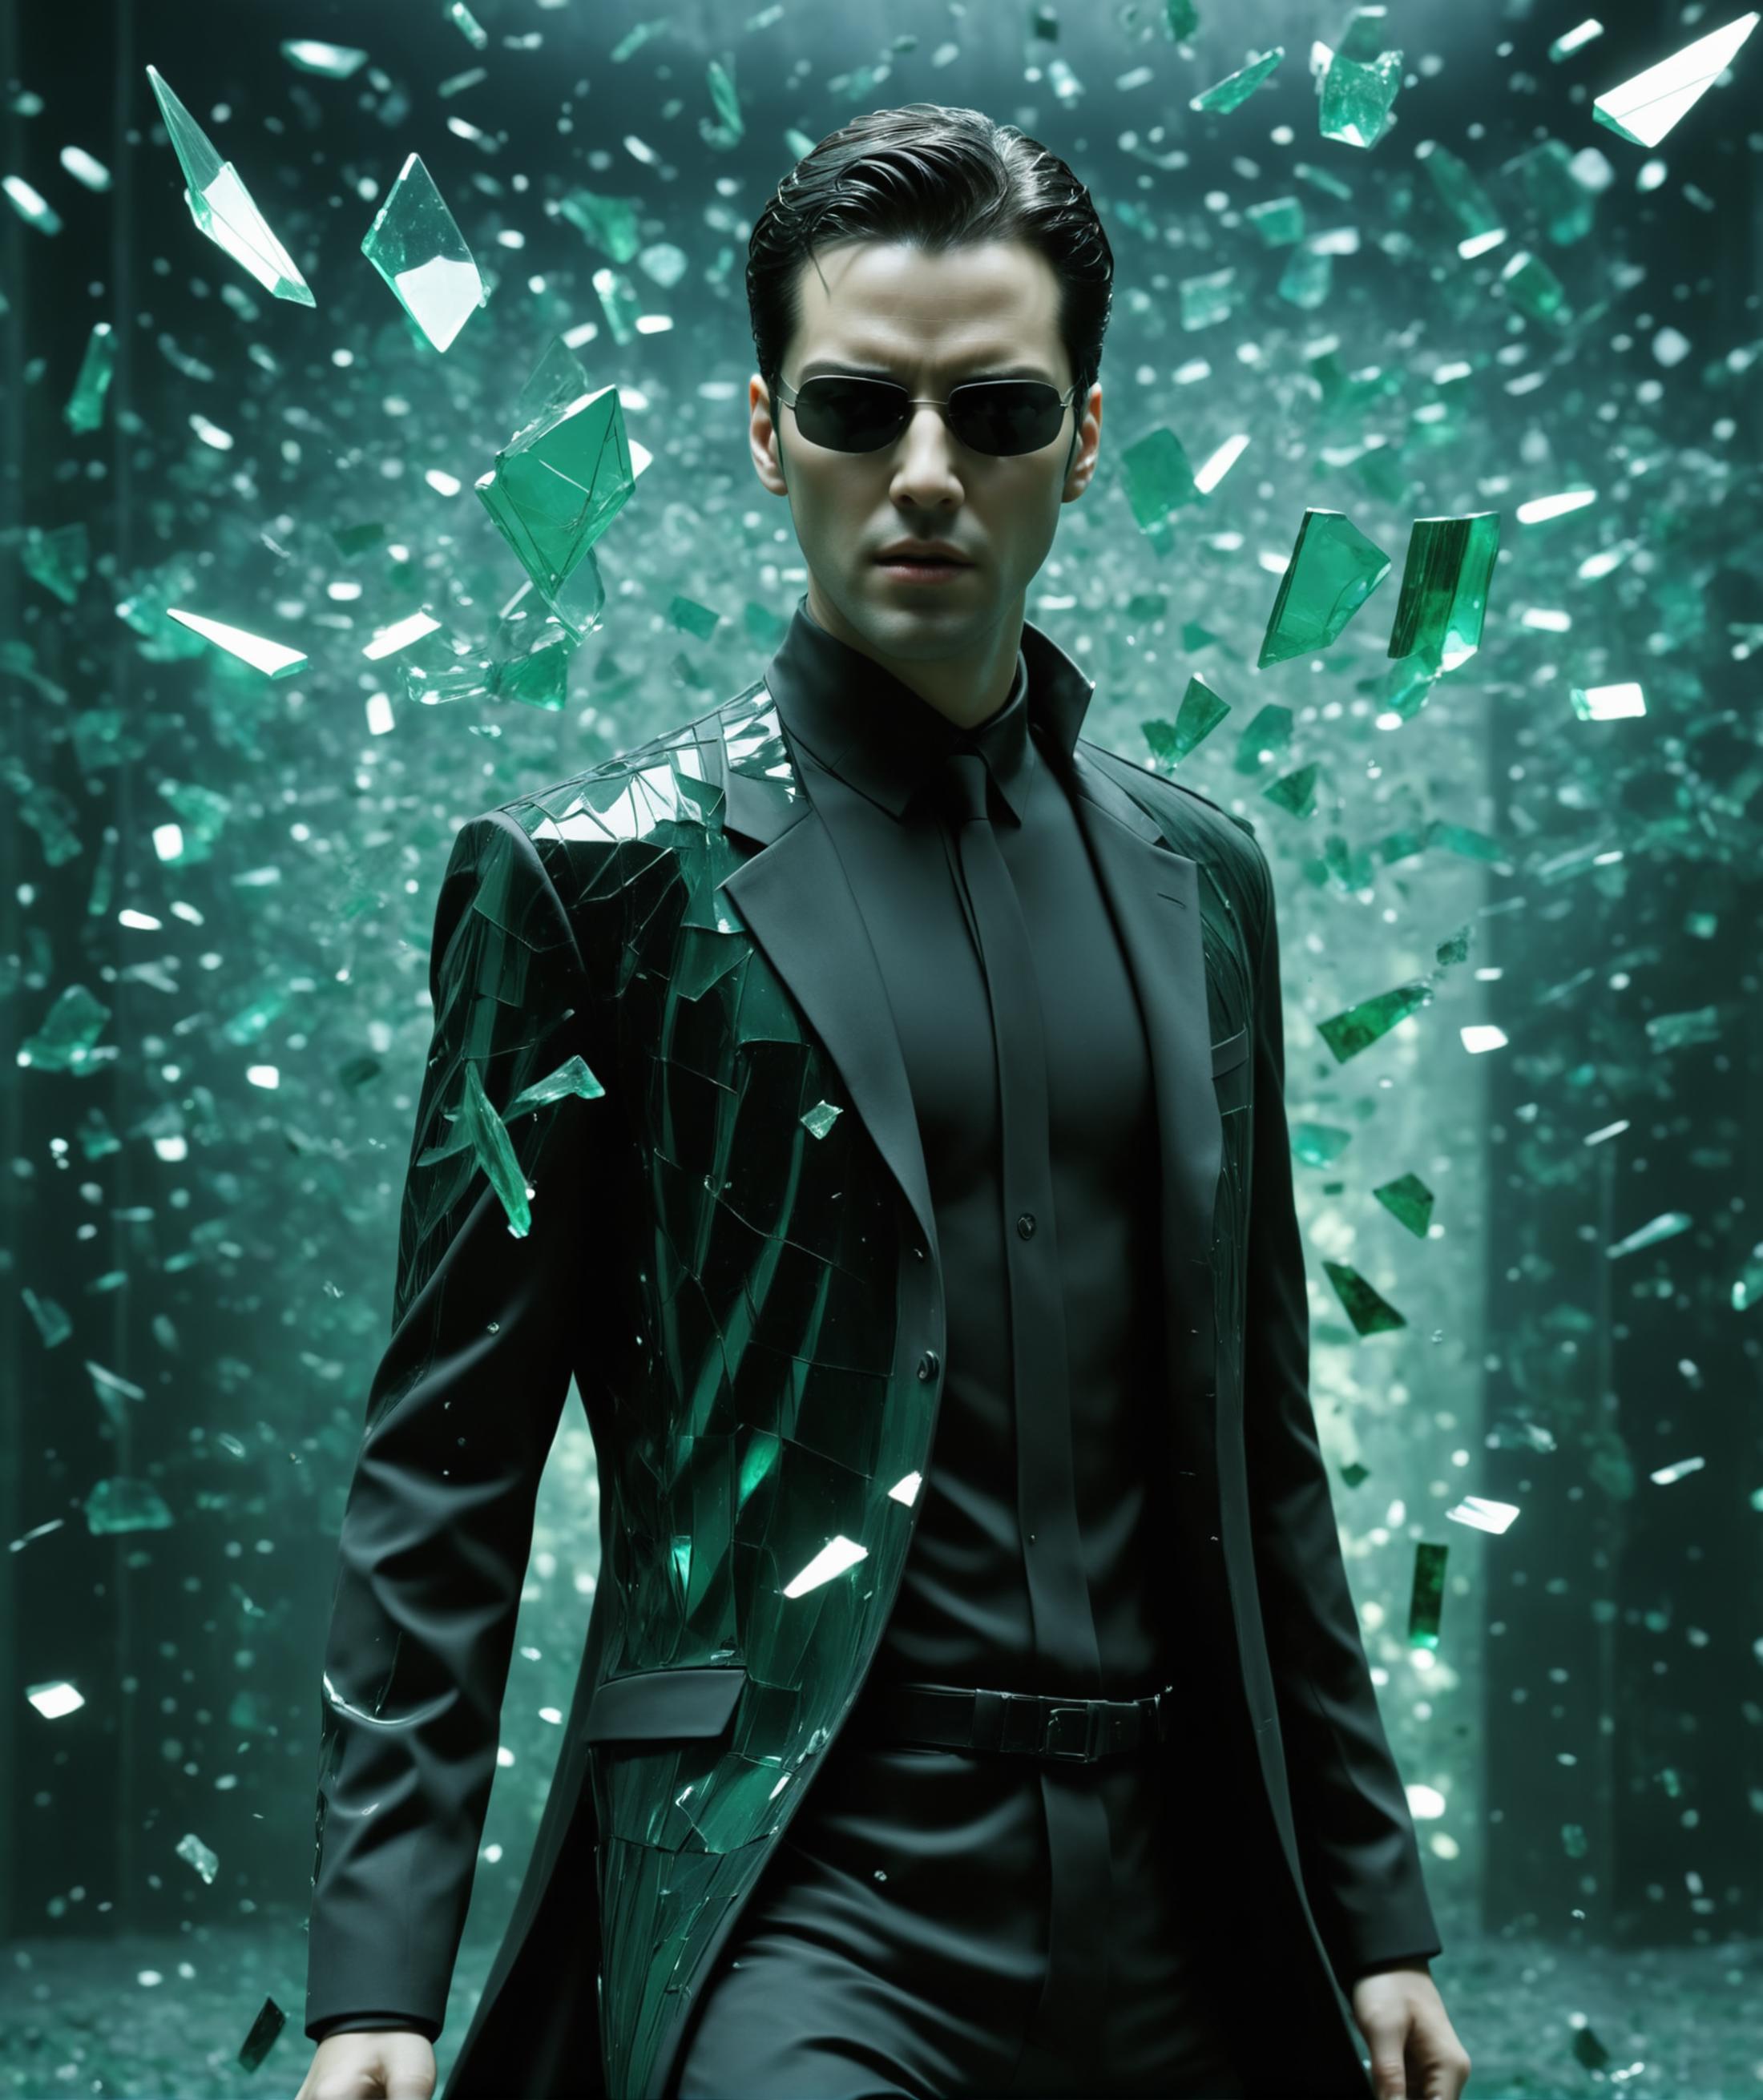 A man in a suit with green shards around him.